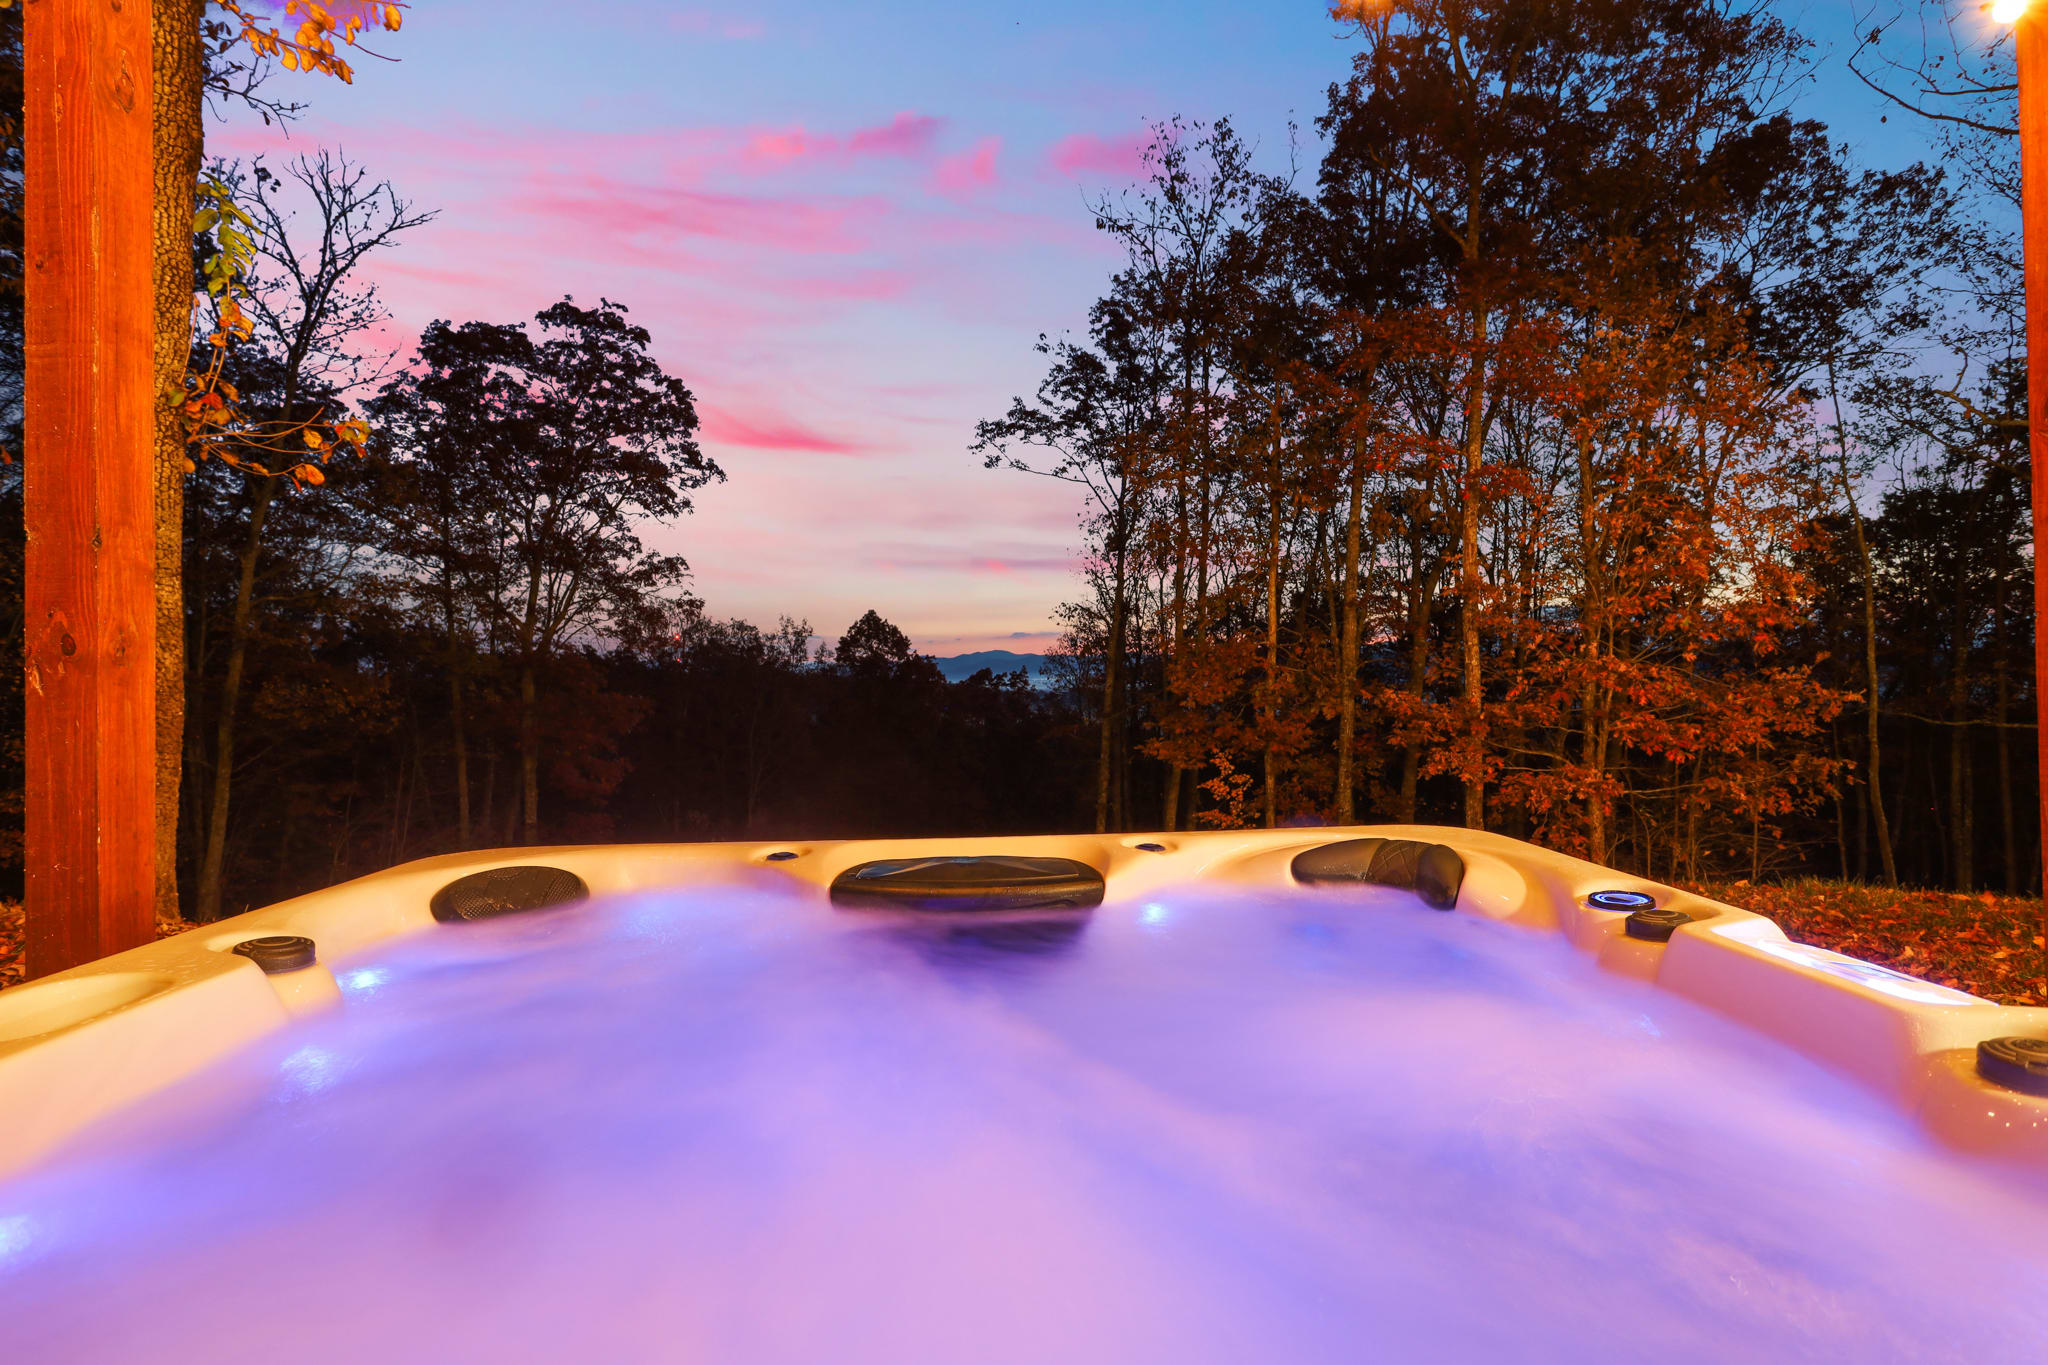 It;s never too early for a hot tub soak! Enjoy the sunrise!